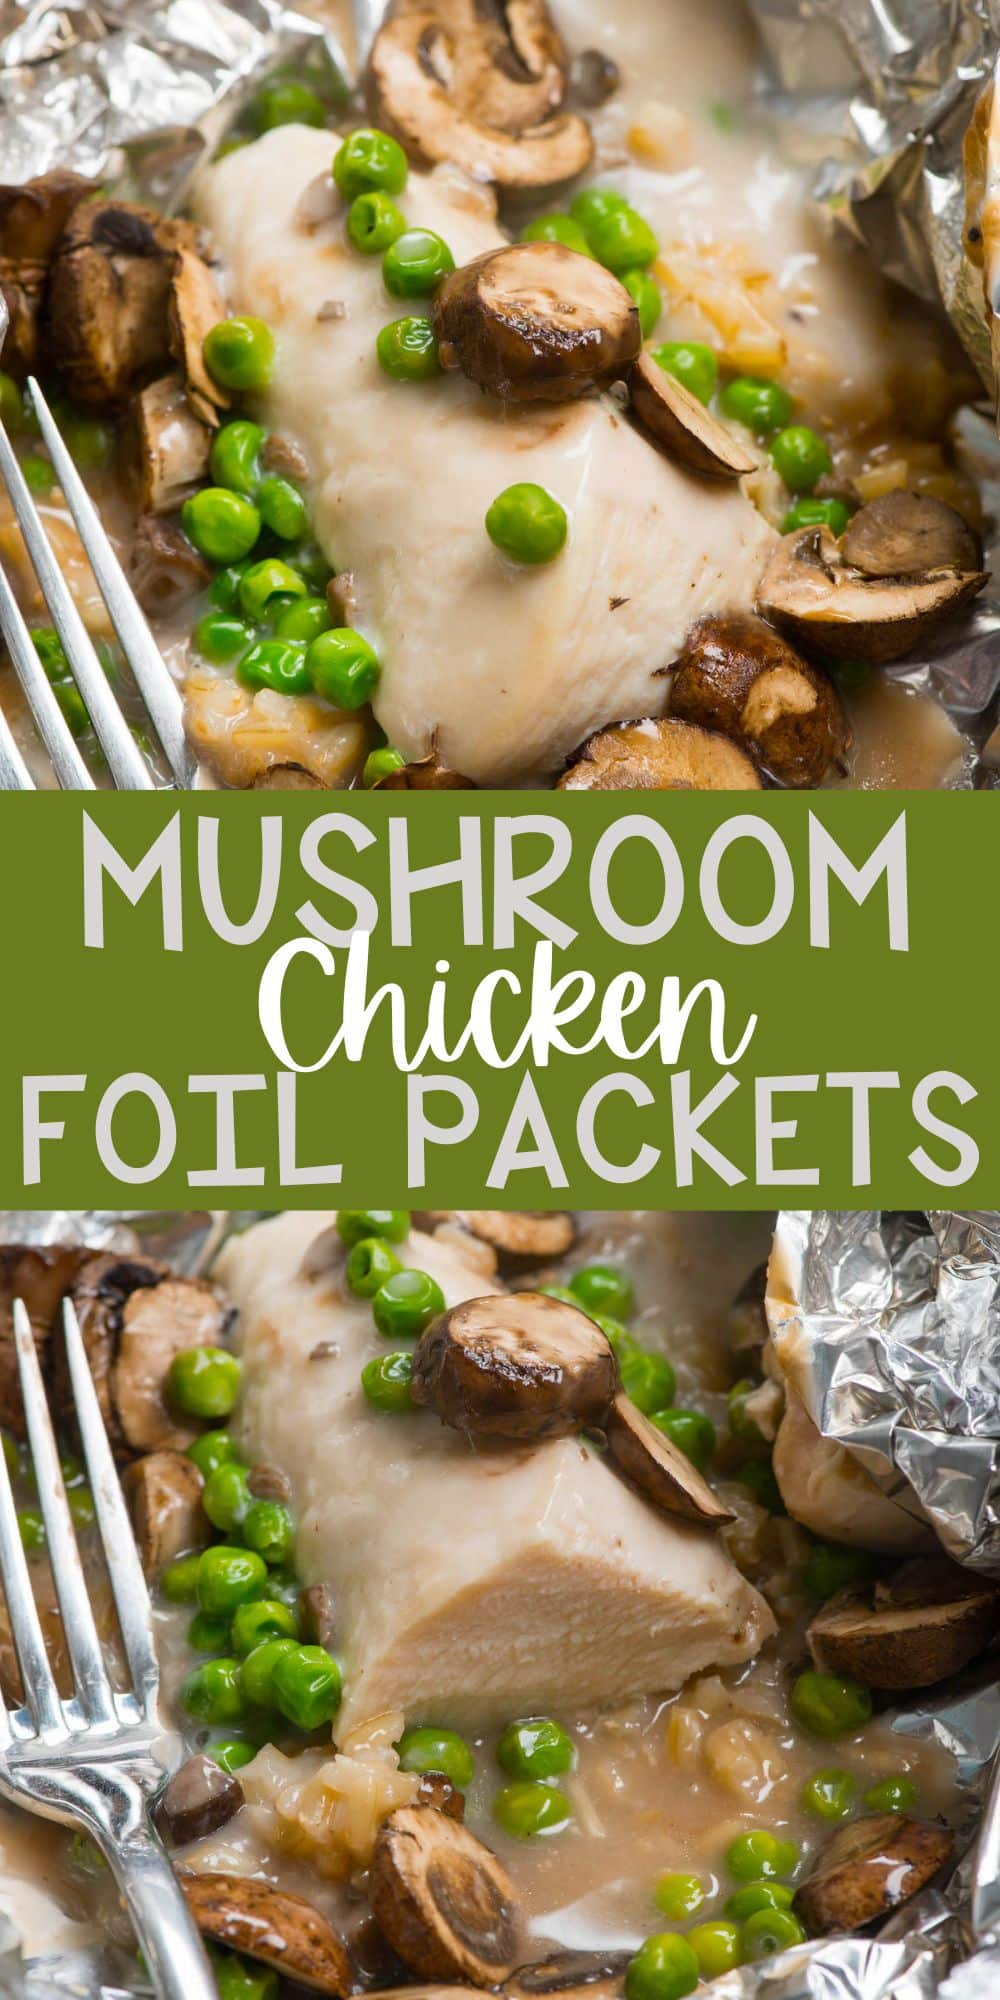 two photos of chicken and mushrooms and peas in tinfoil with words on the image.